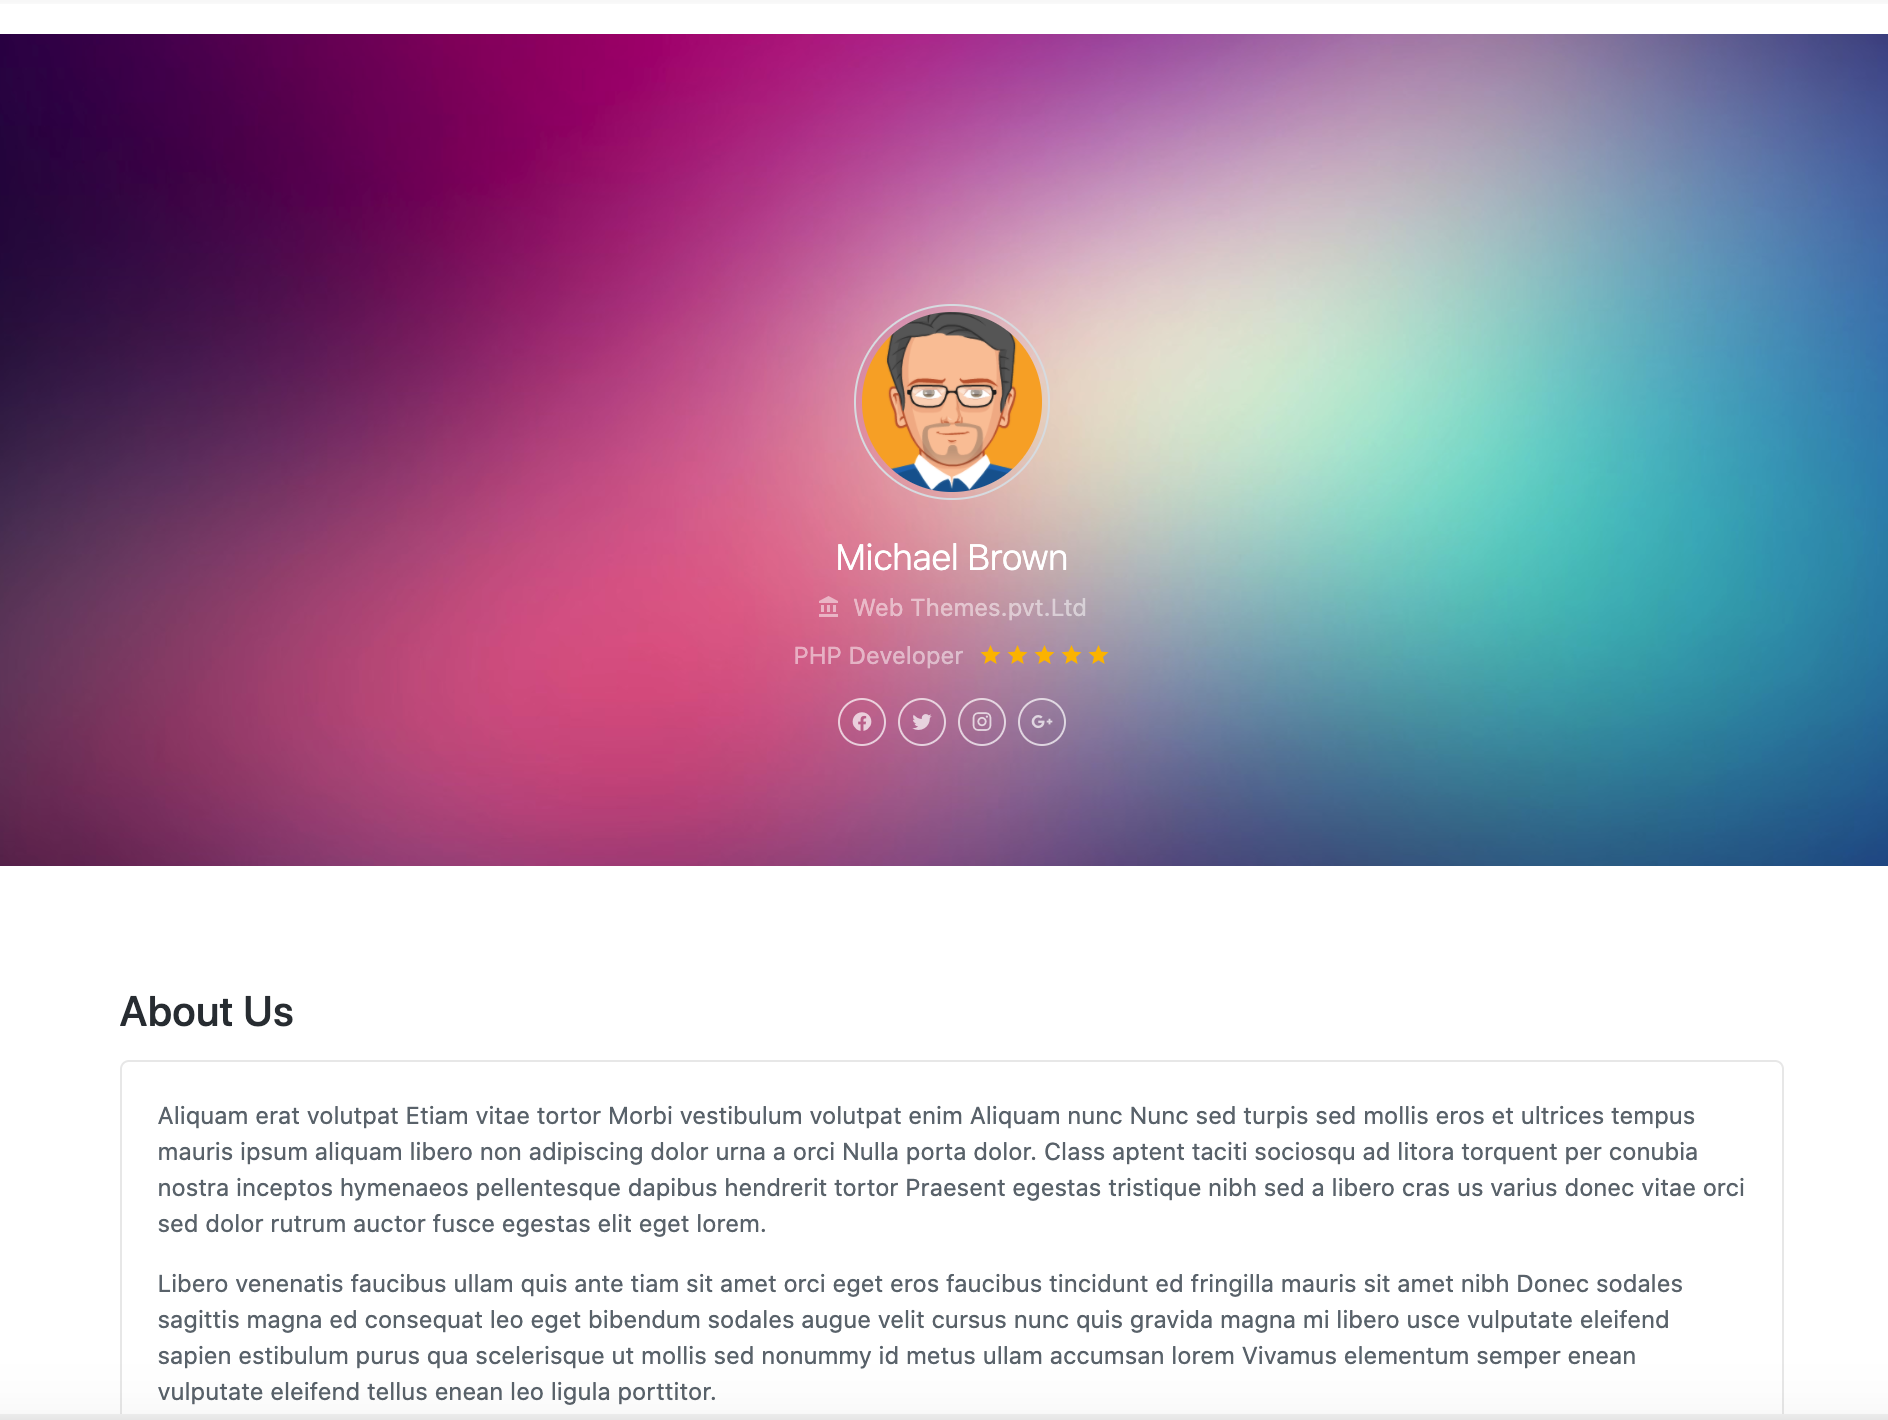 Bootstrap bs4 light resume page example